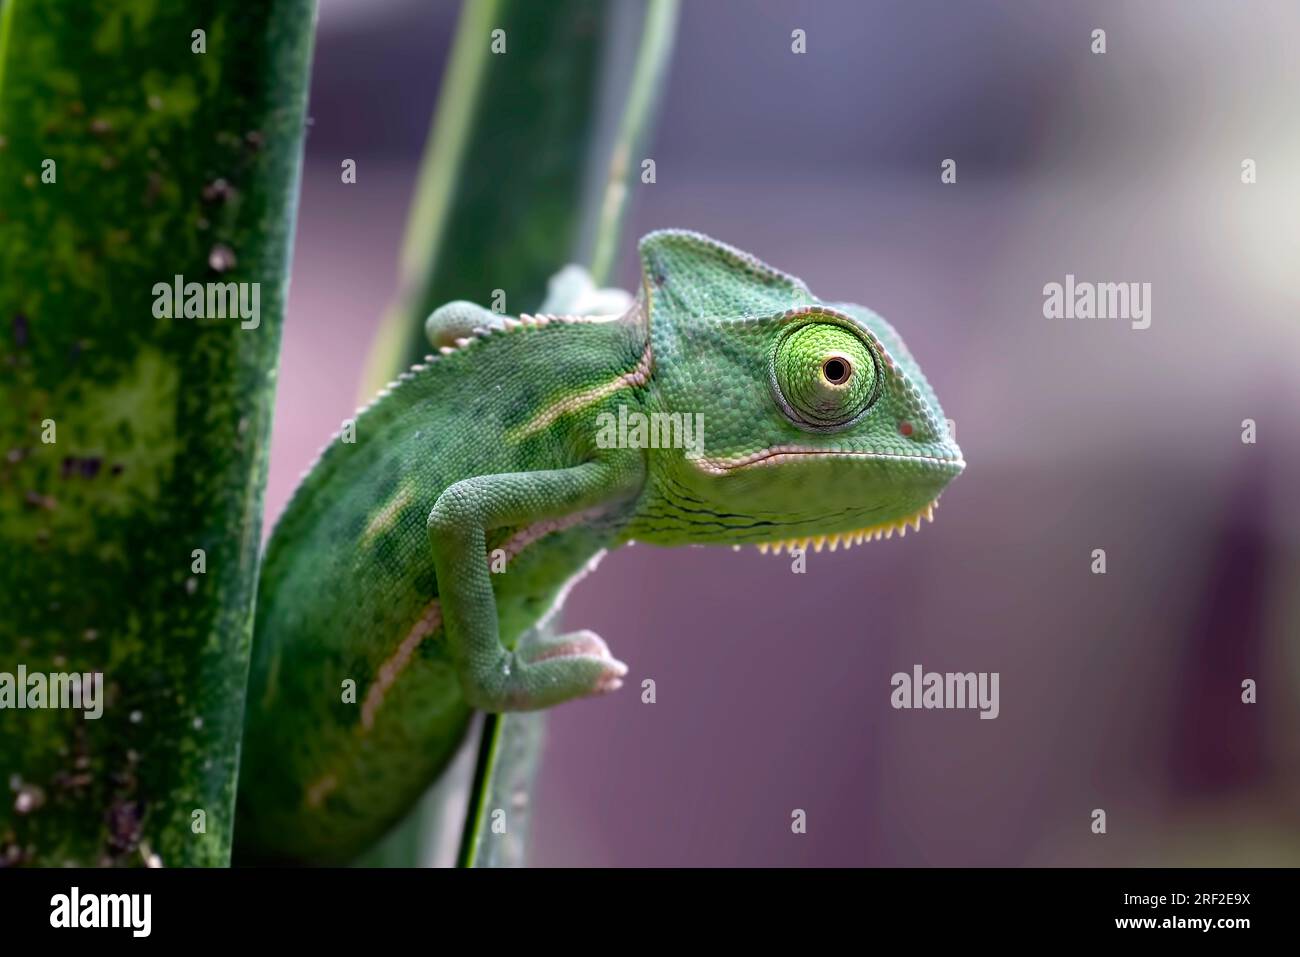 Baby veiled chameleon hanging on a plant Stock Photo